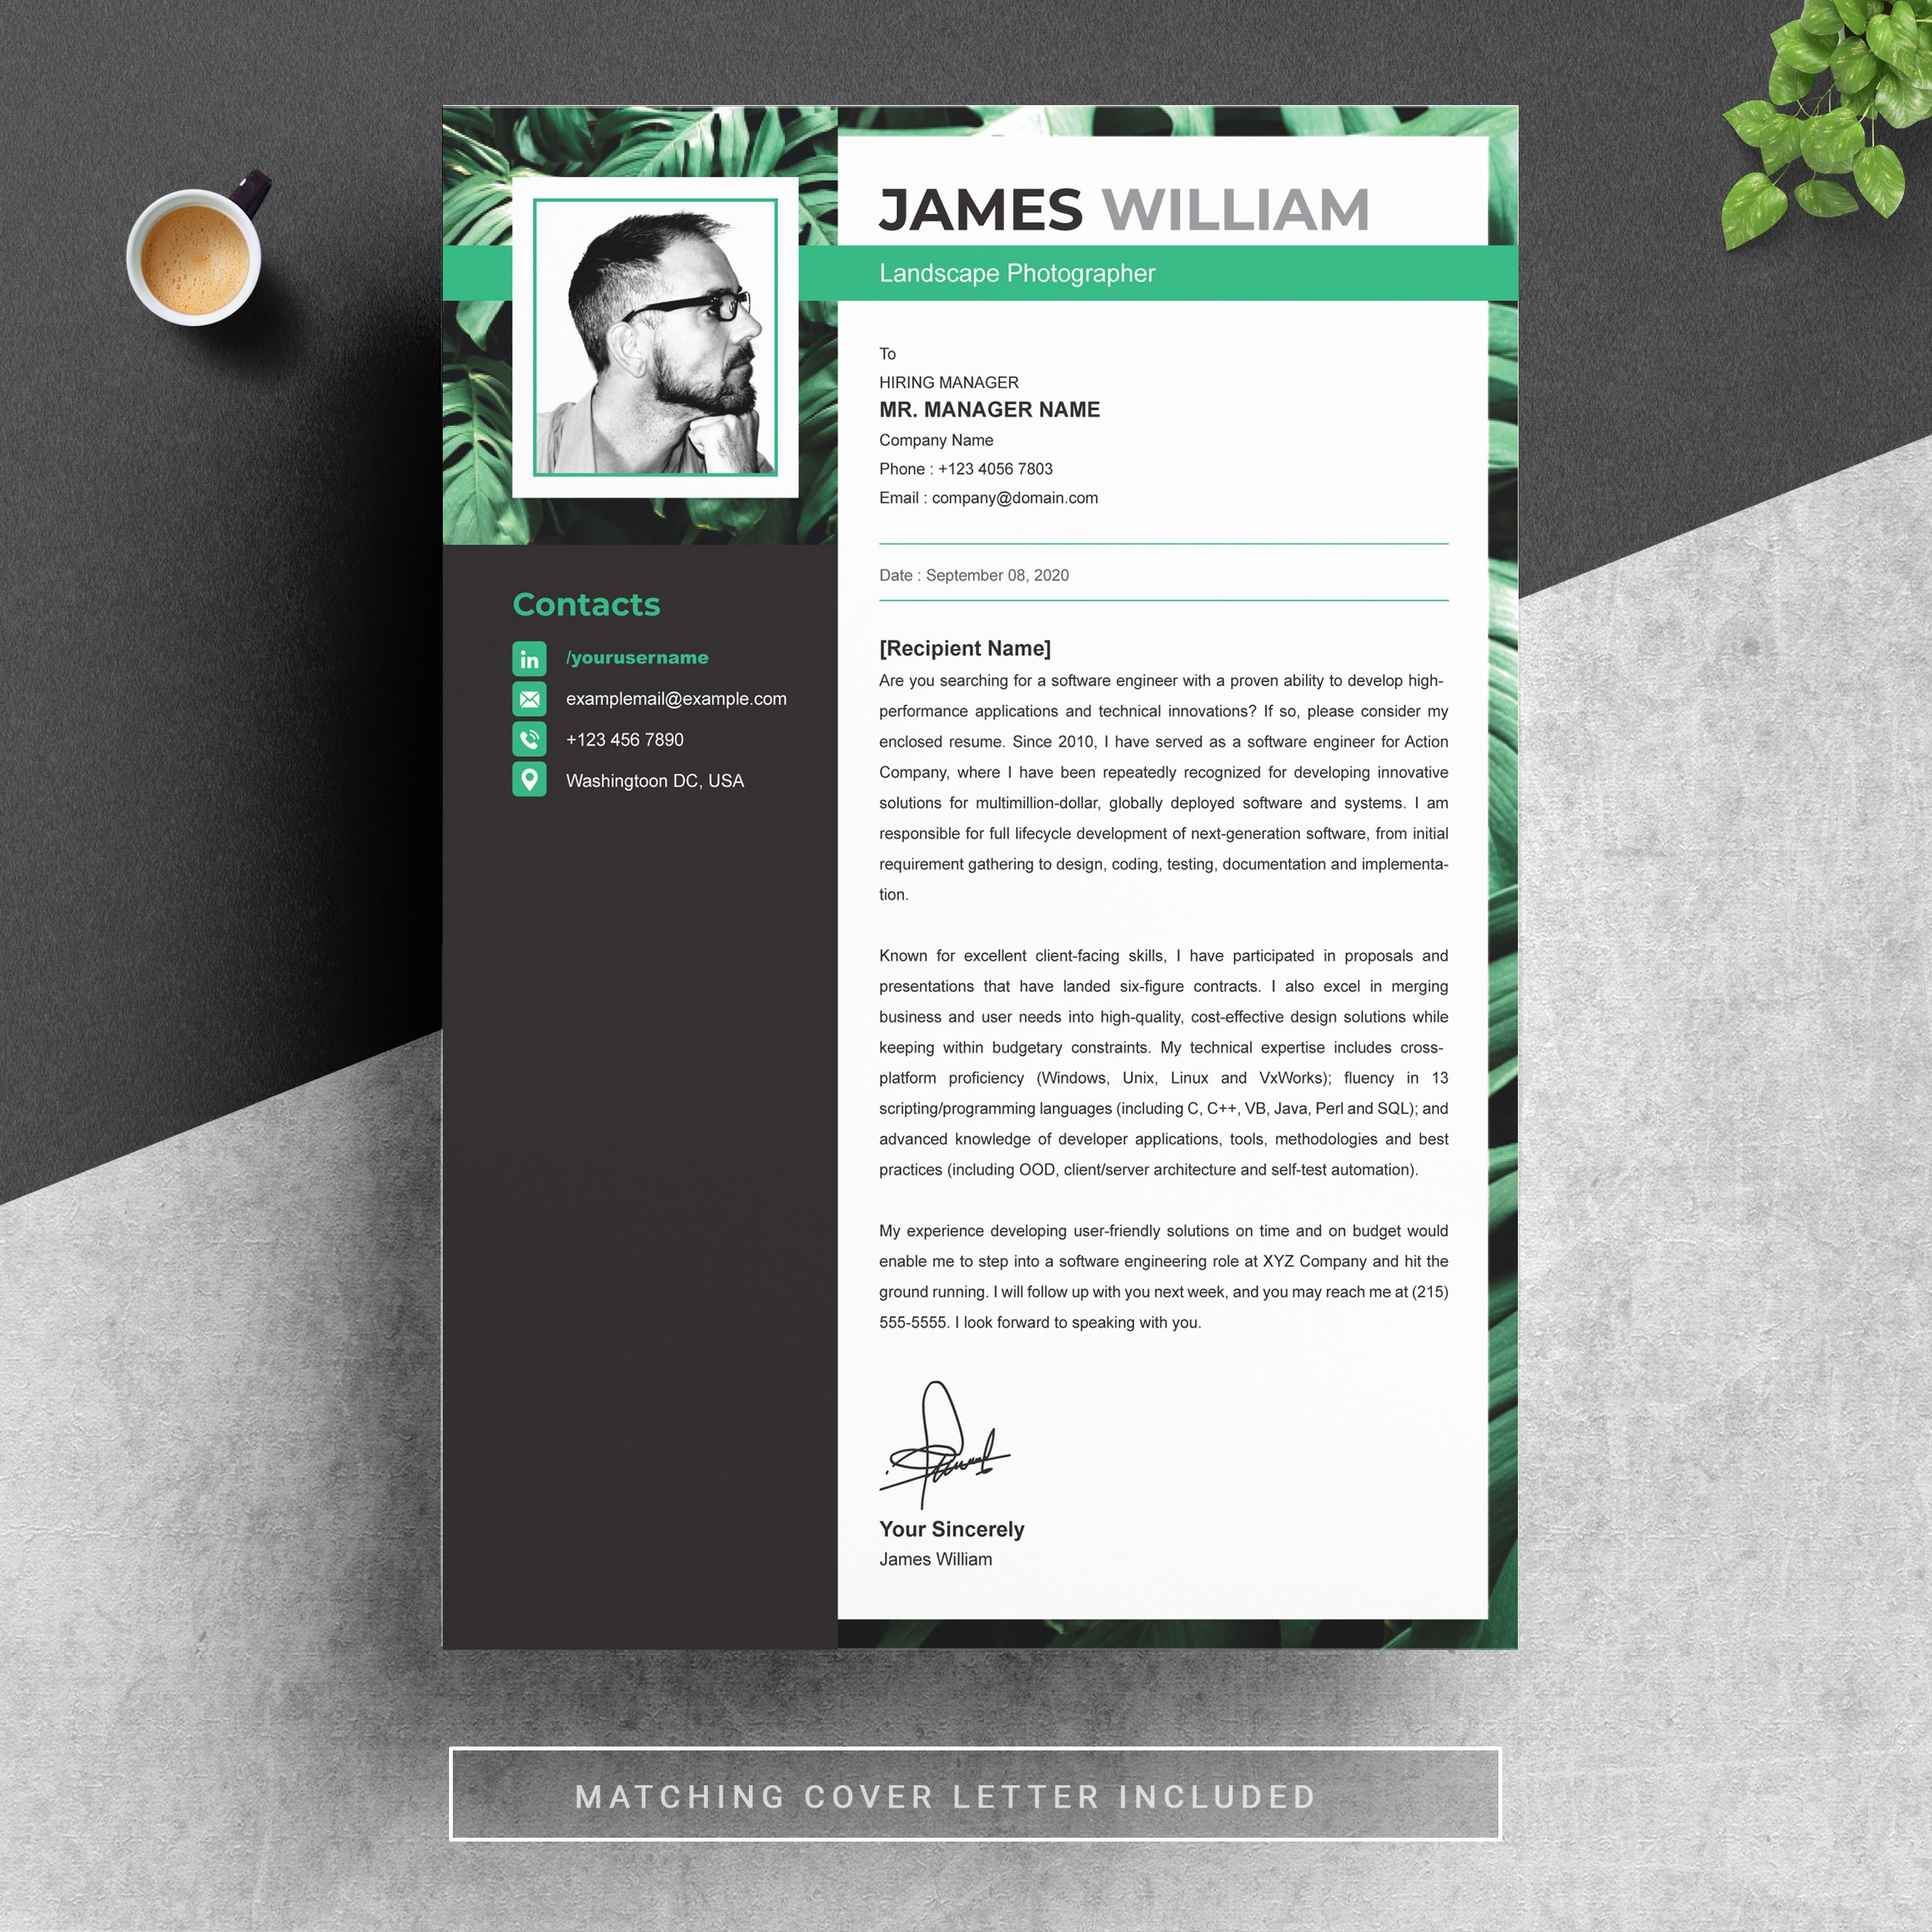 04 resume cover letter page free resume design template 366